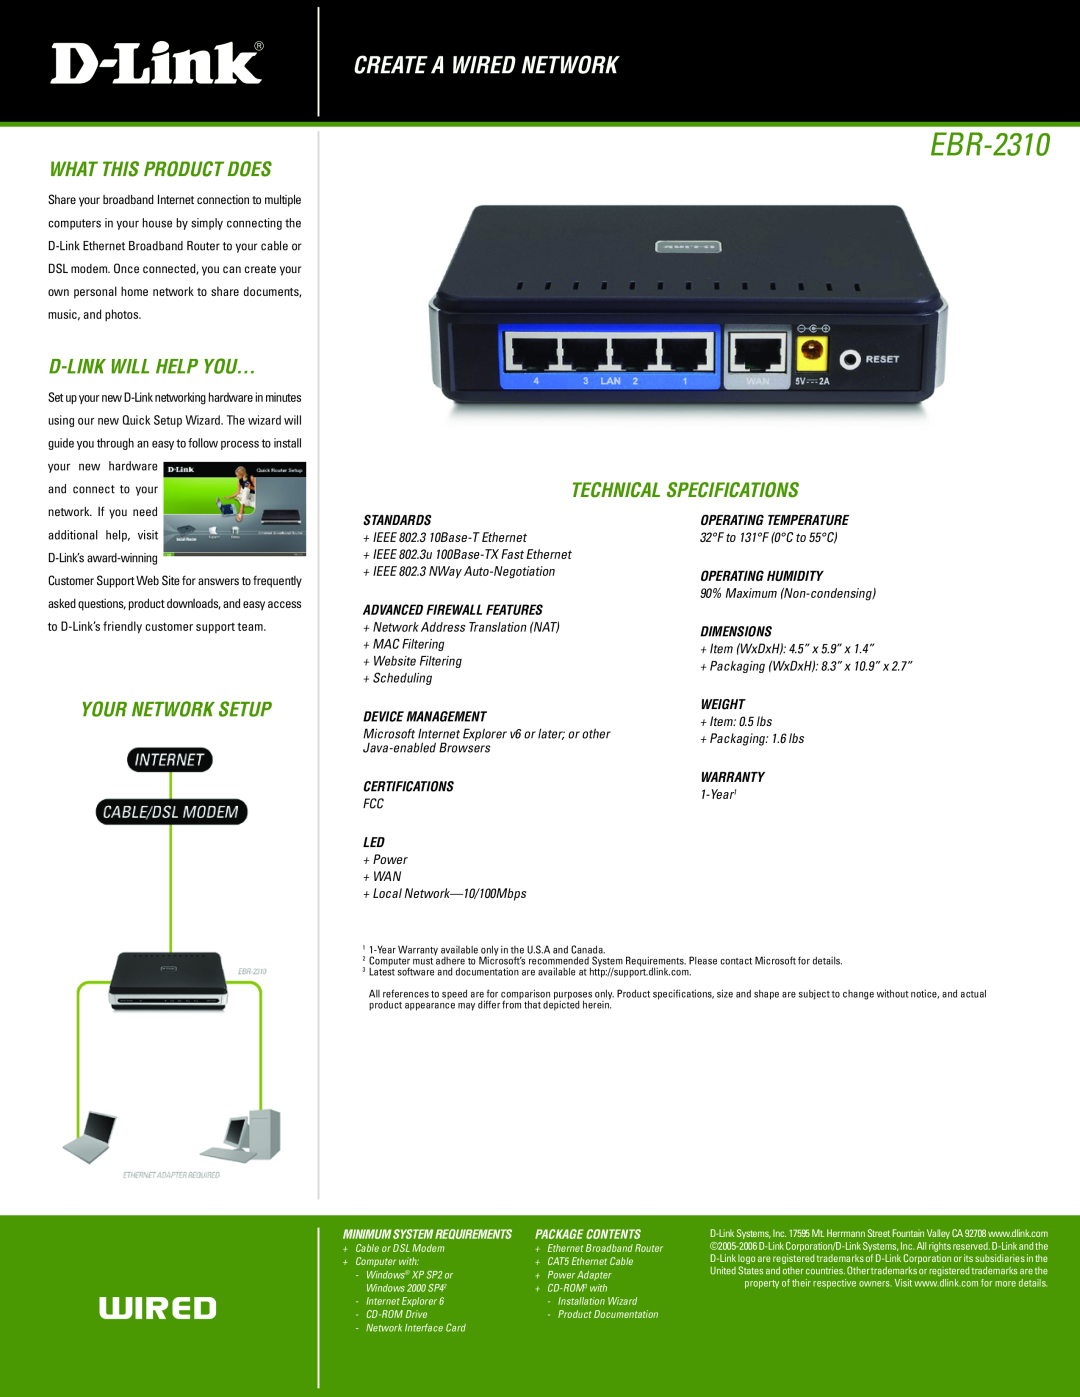 D-Link EBR-2310 manual What This Product Does, D-Link Will Help You…, Technical Specifications, your network setup 